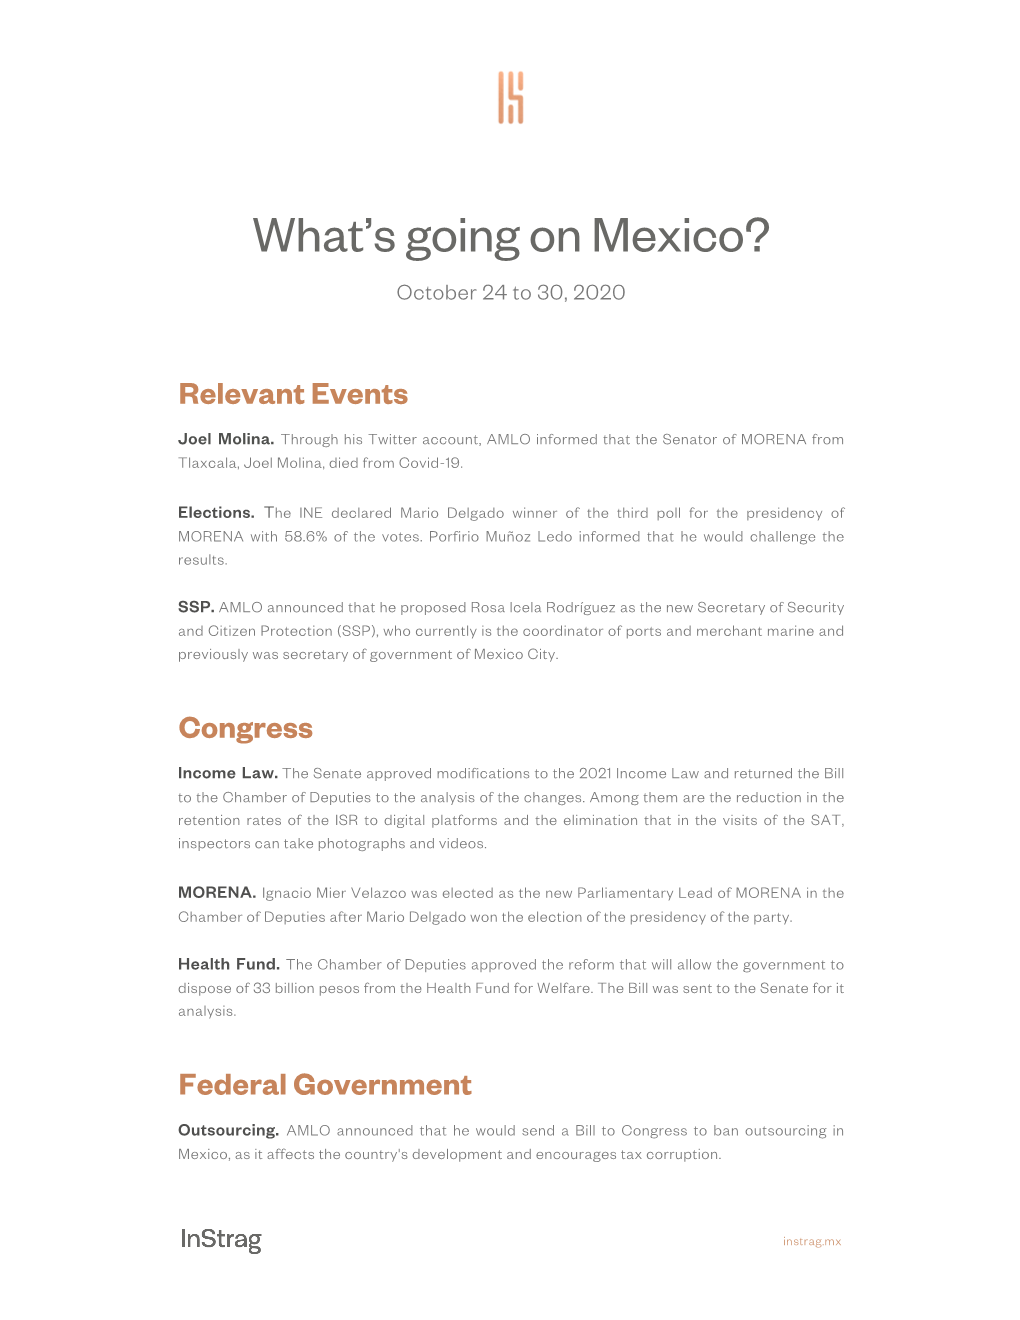 What's Going on Mexico?